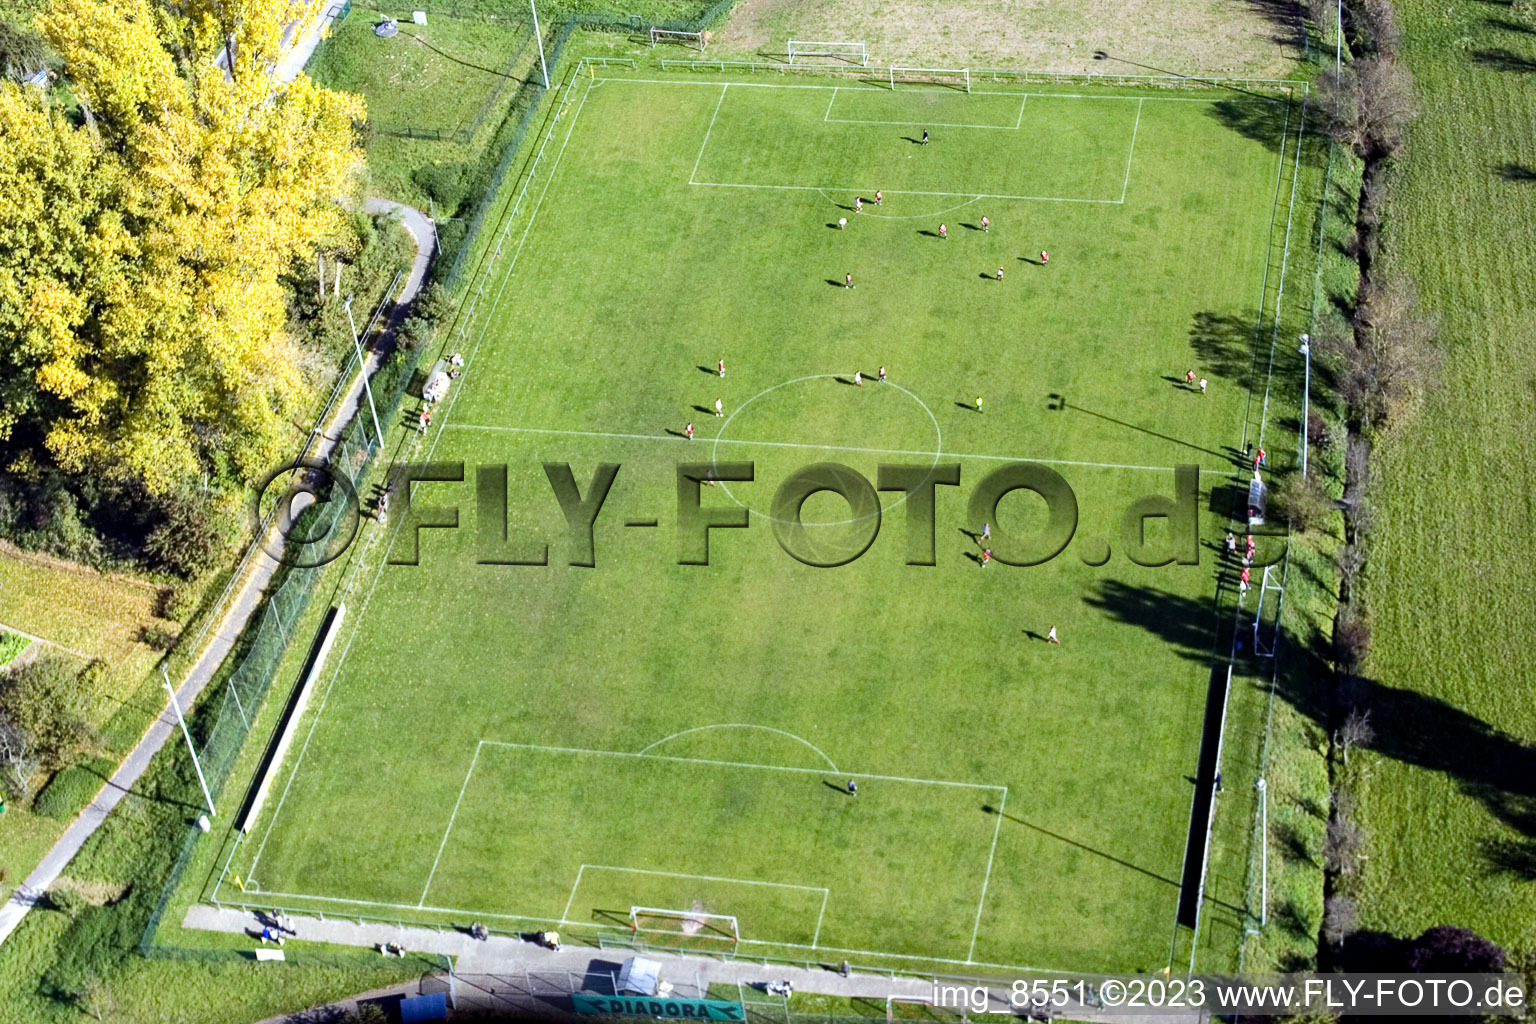 Aerial view of FC Victoria Berghausen in the district Berghausen in Pfinztal in the state Baden-Wuerttemberg, Germany